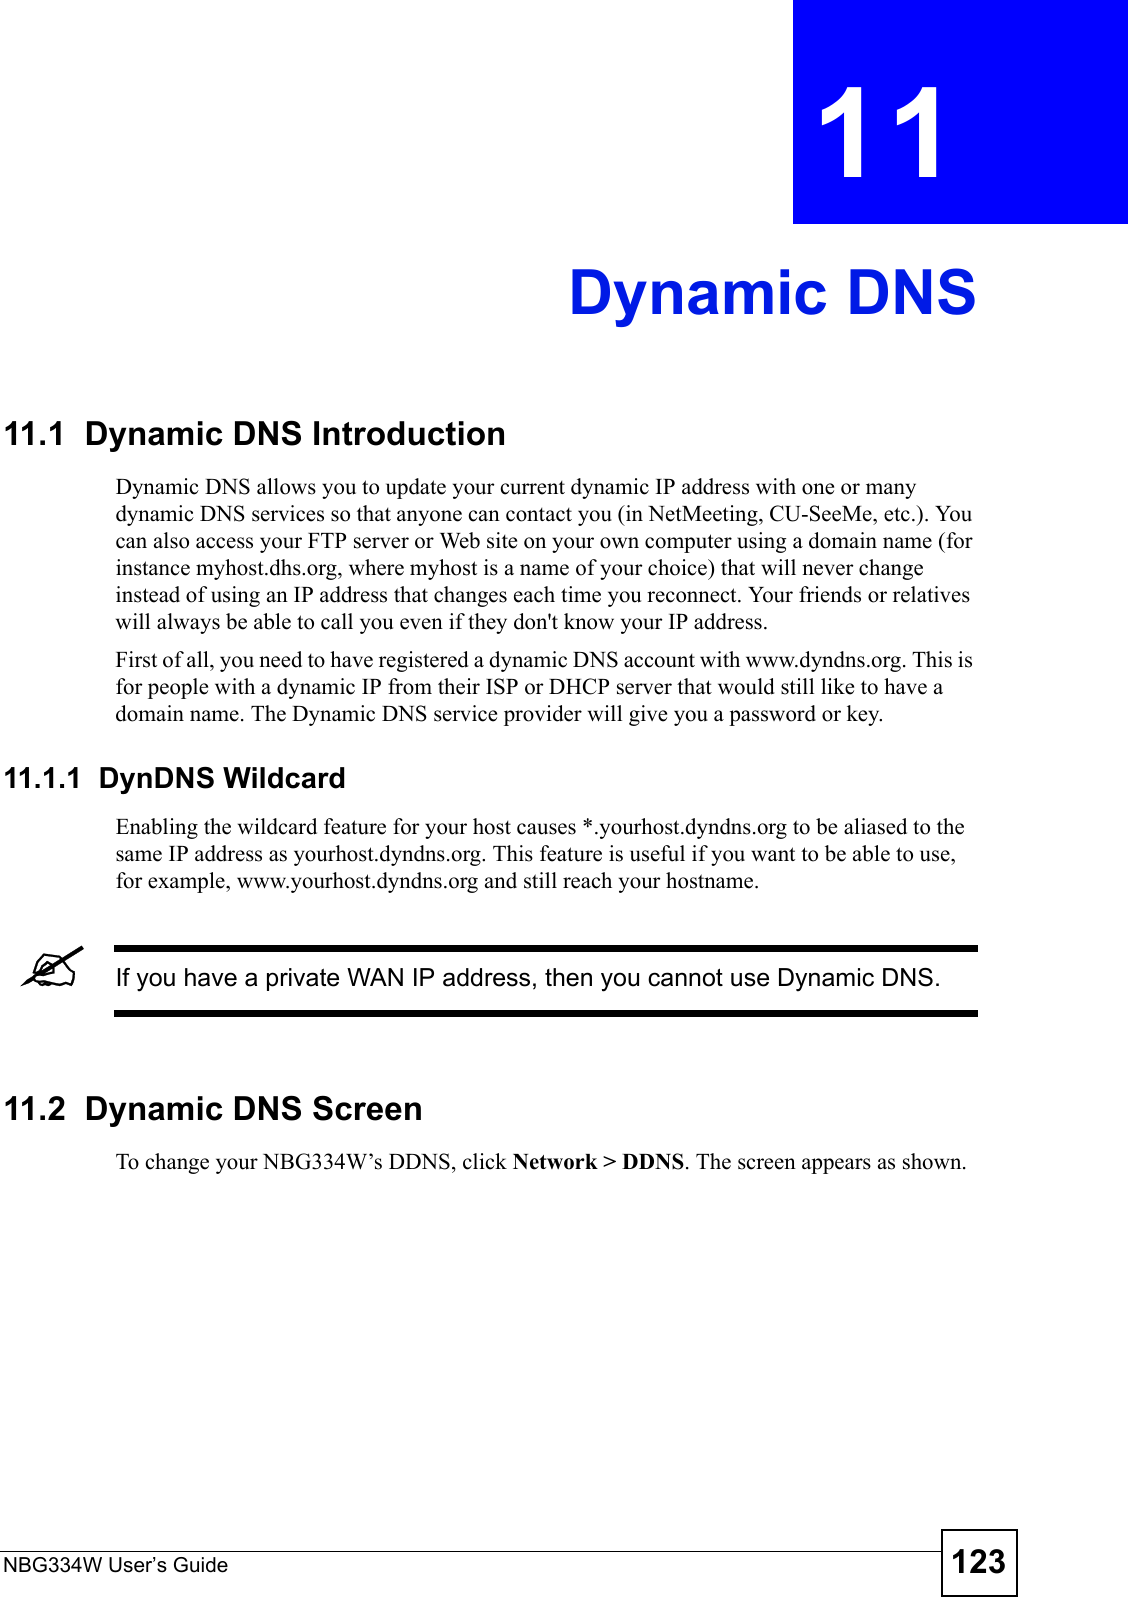 NBG334W User’s Guide 123CHAPTER  11 Dynamic DNS11.1  Dynamic DNS Introduction Dynamic DNS allows you to update your current dynamic IP address with one or many dynamic DNS services so that anyone can contact you (in NetMeeting, CU-SeeMe, etc.). You can also access your FTP server or Web site on your own computer using a domain name (for instance myhost.dhs.org, where myhost is a name of your choice) that will never change instead of using an IP address that changes each time you reconnect. Your friends or relatives will always be able to call you even if they don&apos;t know your IP address.First of all, you need to have registered a dynamic DNS account with www.dyndns.org. This is for people with a dynamic IP from their ISP or DHCP server that would still like to have a domain name. The Dynamic DNS service provider will give you a password or key.11.1.1  DynDNS Wildcard Enabling the wildcard feature for your host causes *.yourhost.dyndns.org to be aliased to the same IP address as yourhost.dyndns.org. This feature is useful if you want to be able to use, for example, www.yourhost.dyndns.org and still reach your hostname.&quot;If you have a private WAN IP address, then you cannot use Dynamic DNS.11.2  Dynamic DNS Screen   To change your NBG334W’s DDNS, click Network &gt; DDNS. The screen appears as shown.